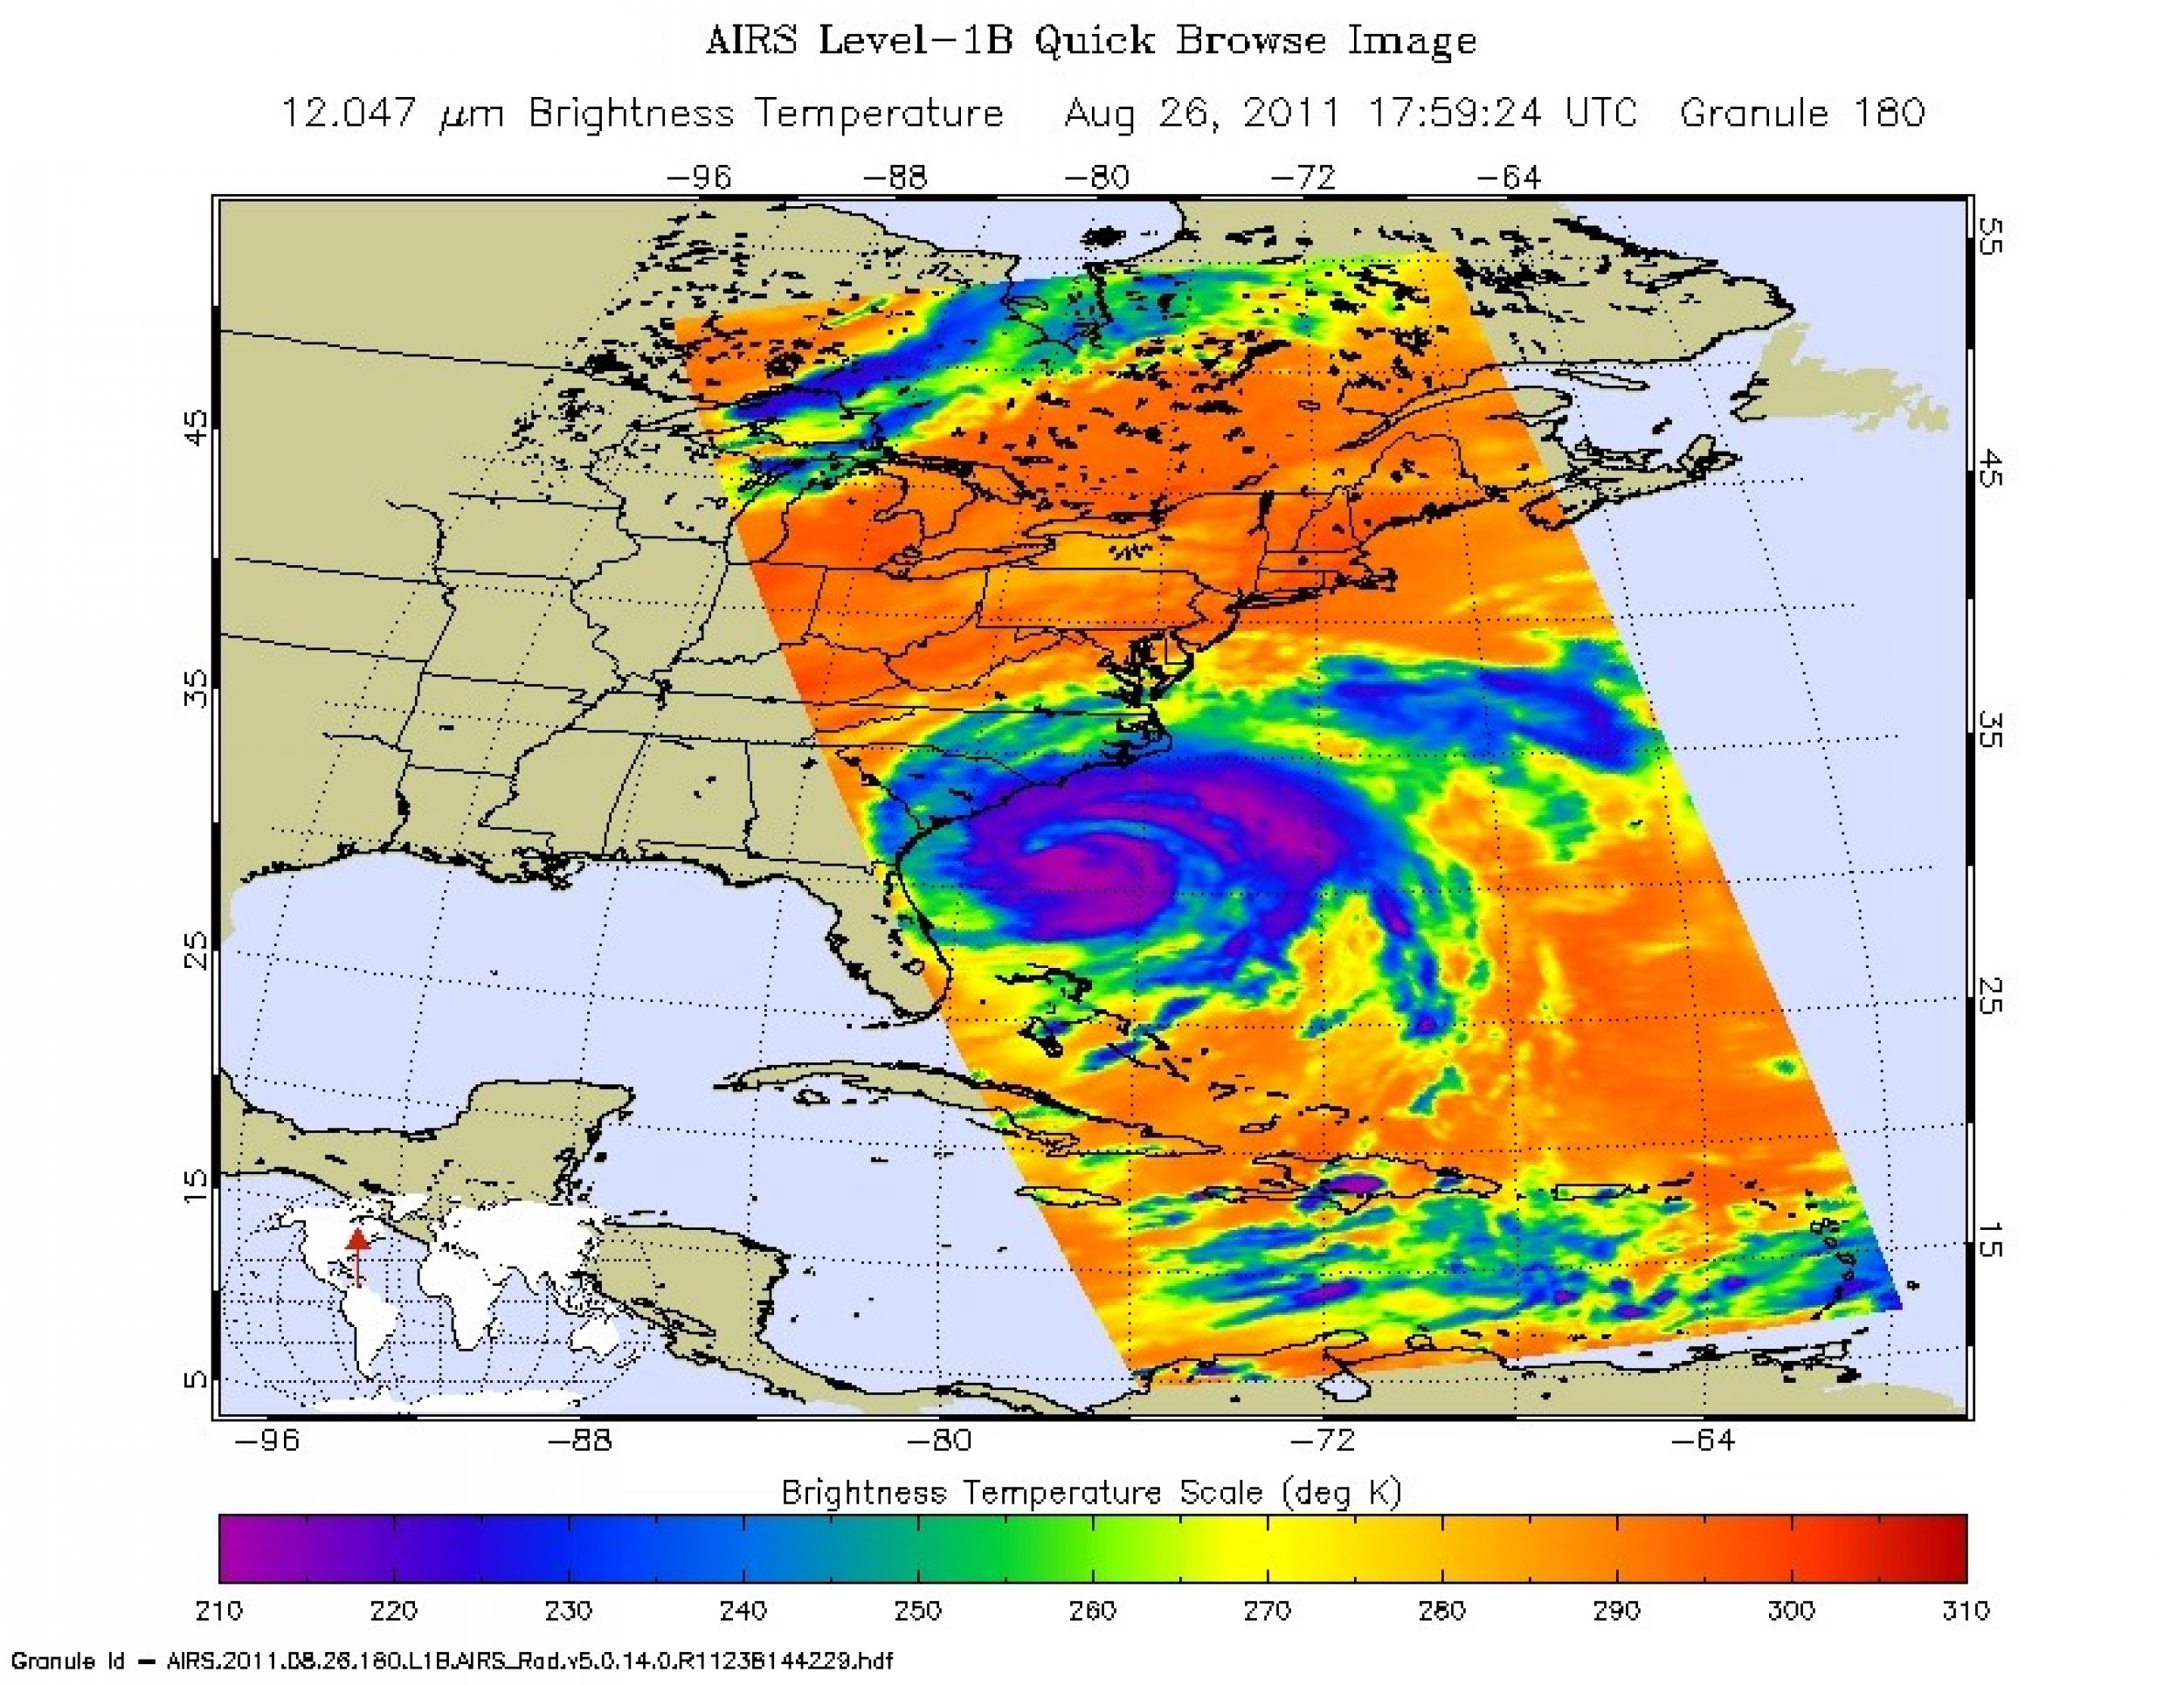 Infrared image of Hurricane Irene taken at 159 p.m. EDT 1759 UTC on Aug. 26, 2011 by the Atmospheric Infrared Sounder AIRS instrument on NASAs Aqua spacecraft. Areas colored purple represent the storms coldest cloud-top temperatures and areas of h